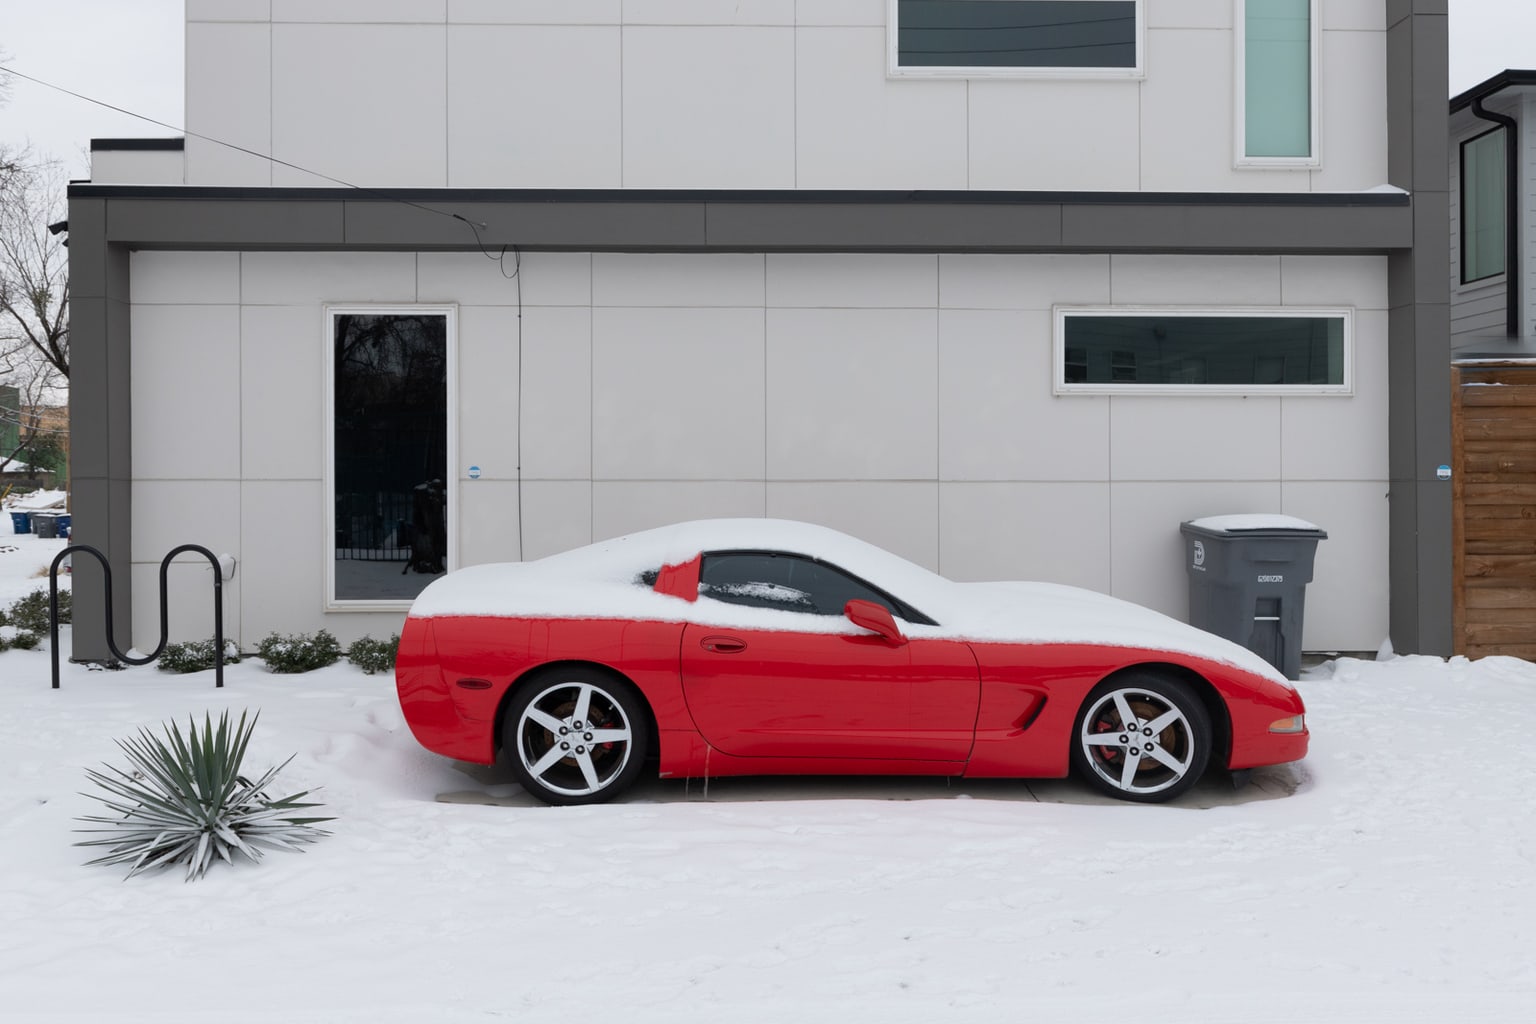 A red corvette partially buried with snow